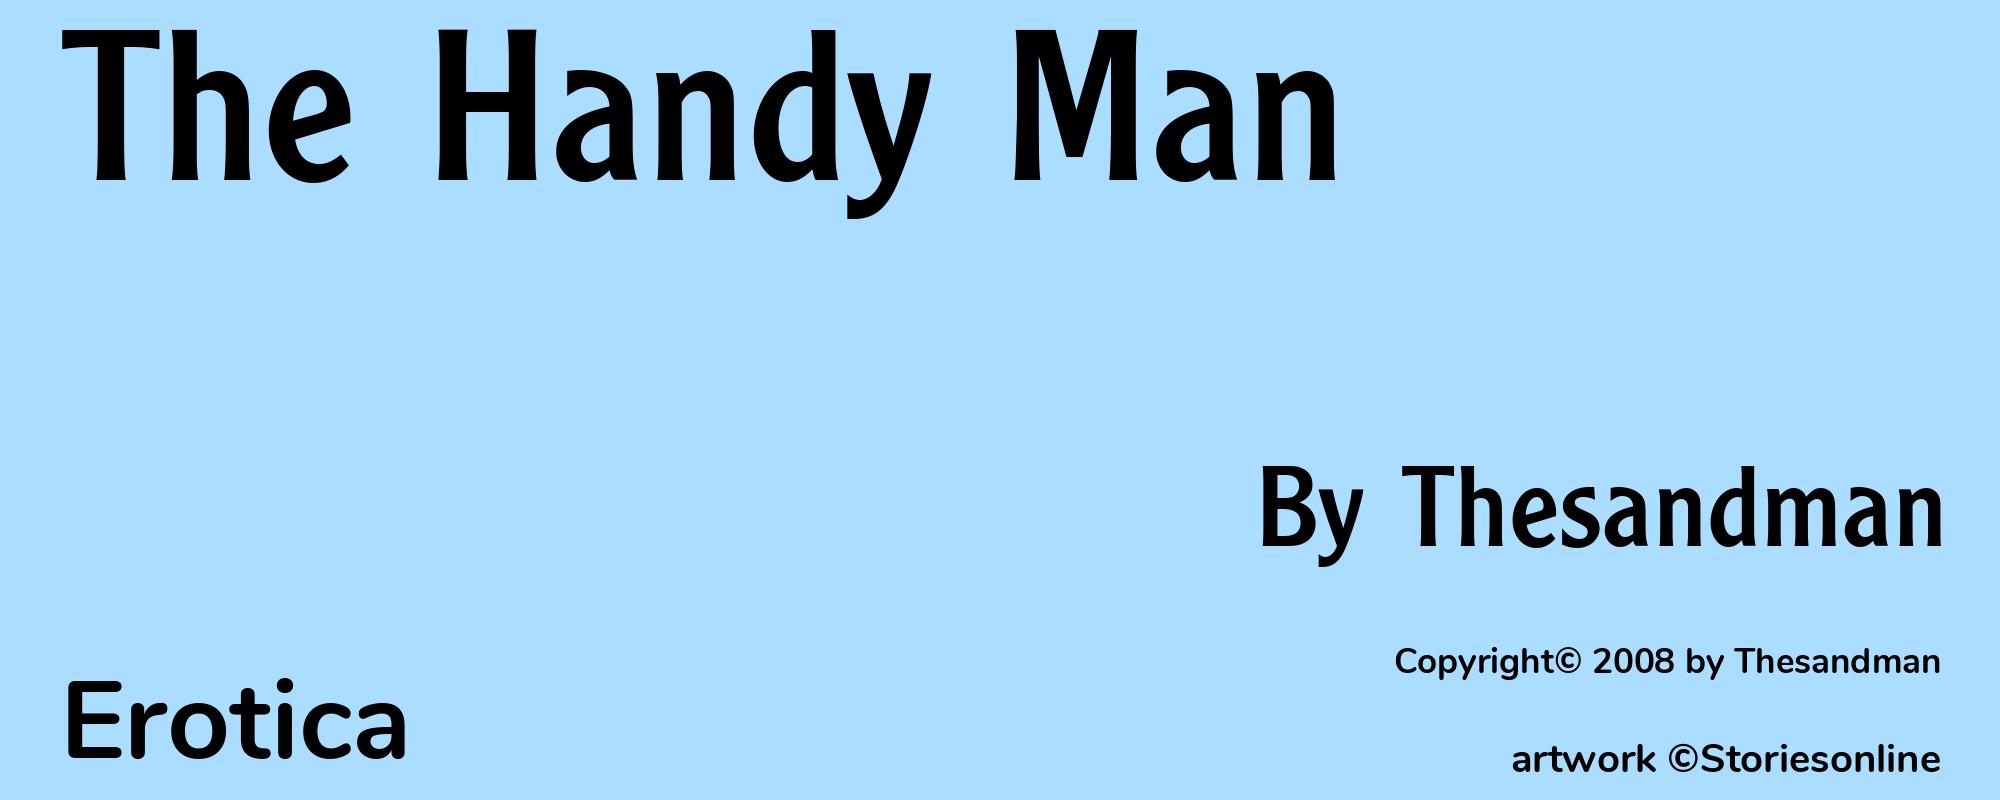 The Handy Man - Cover